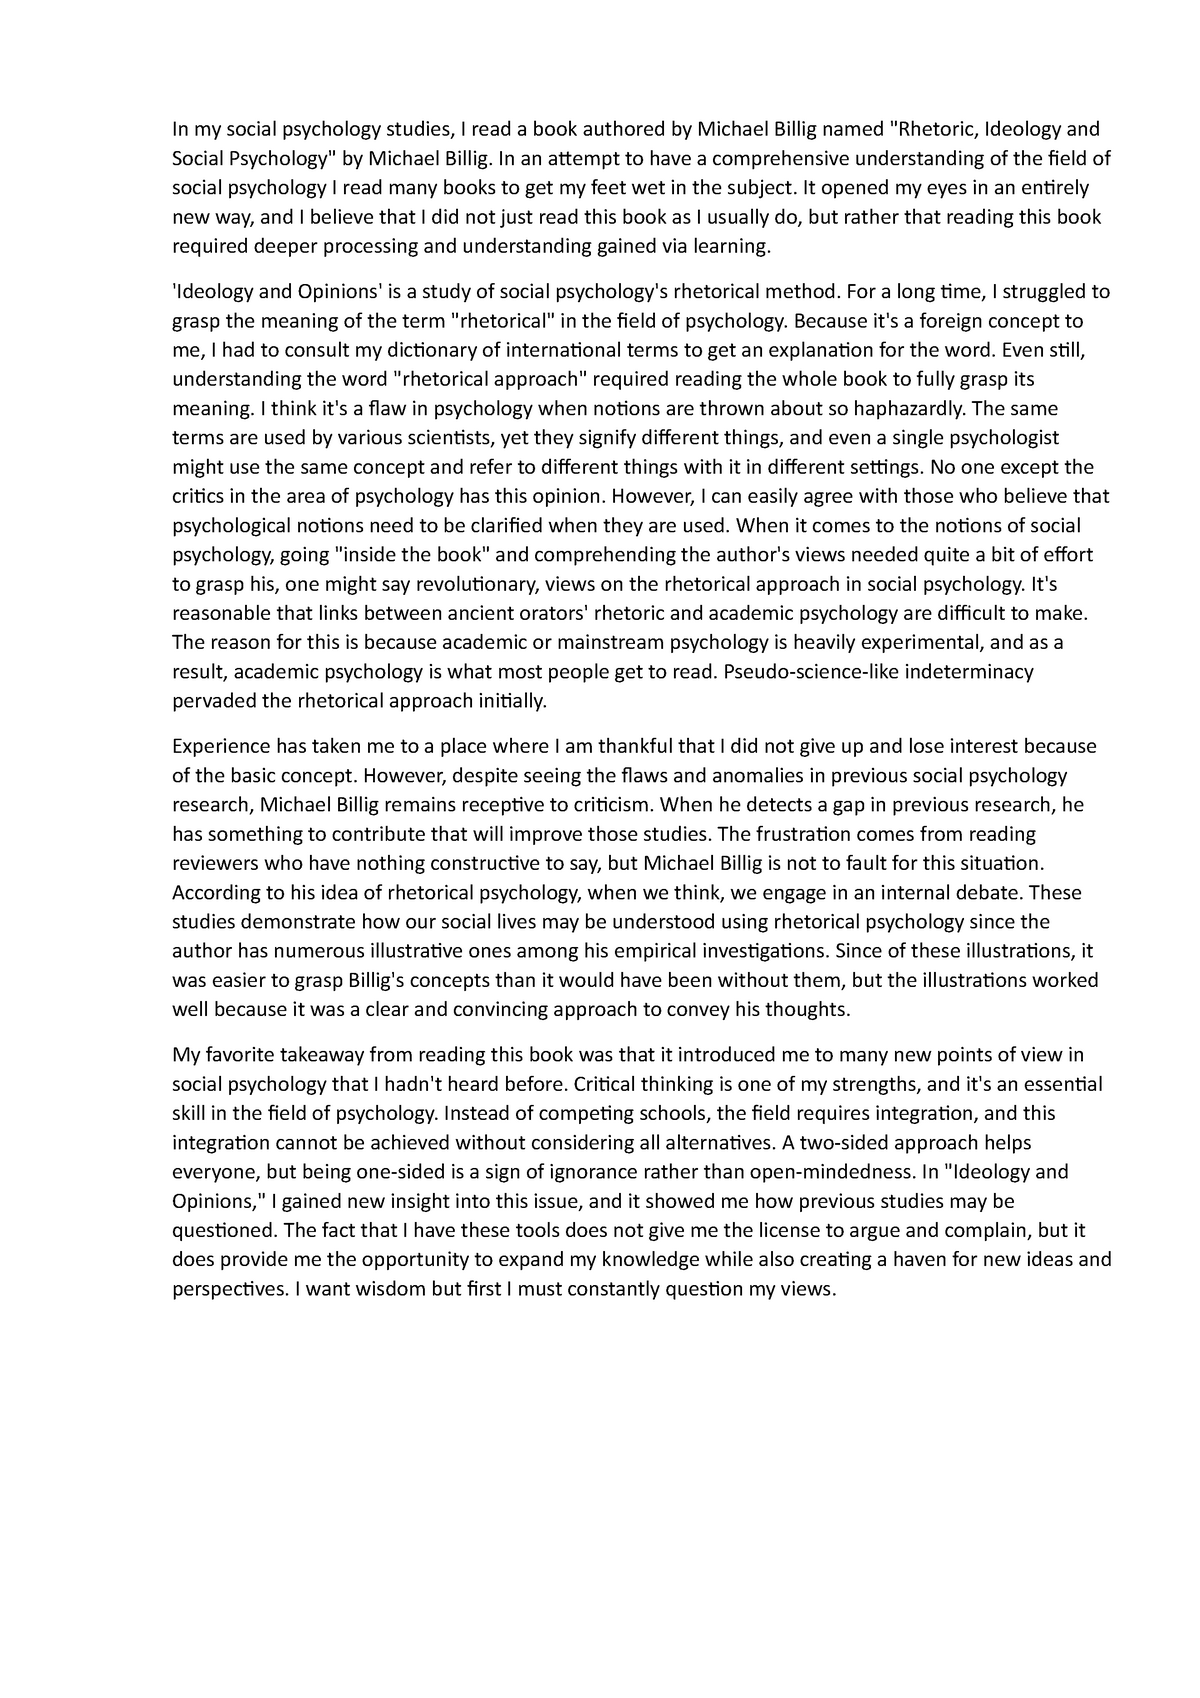 Psychology reaction paper - In my social psychology studies, I read a ...